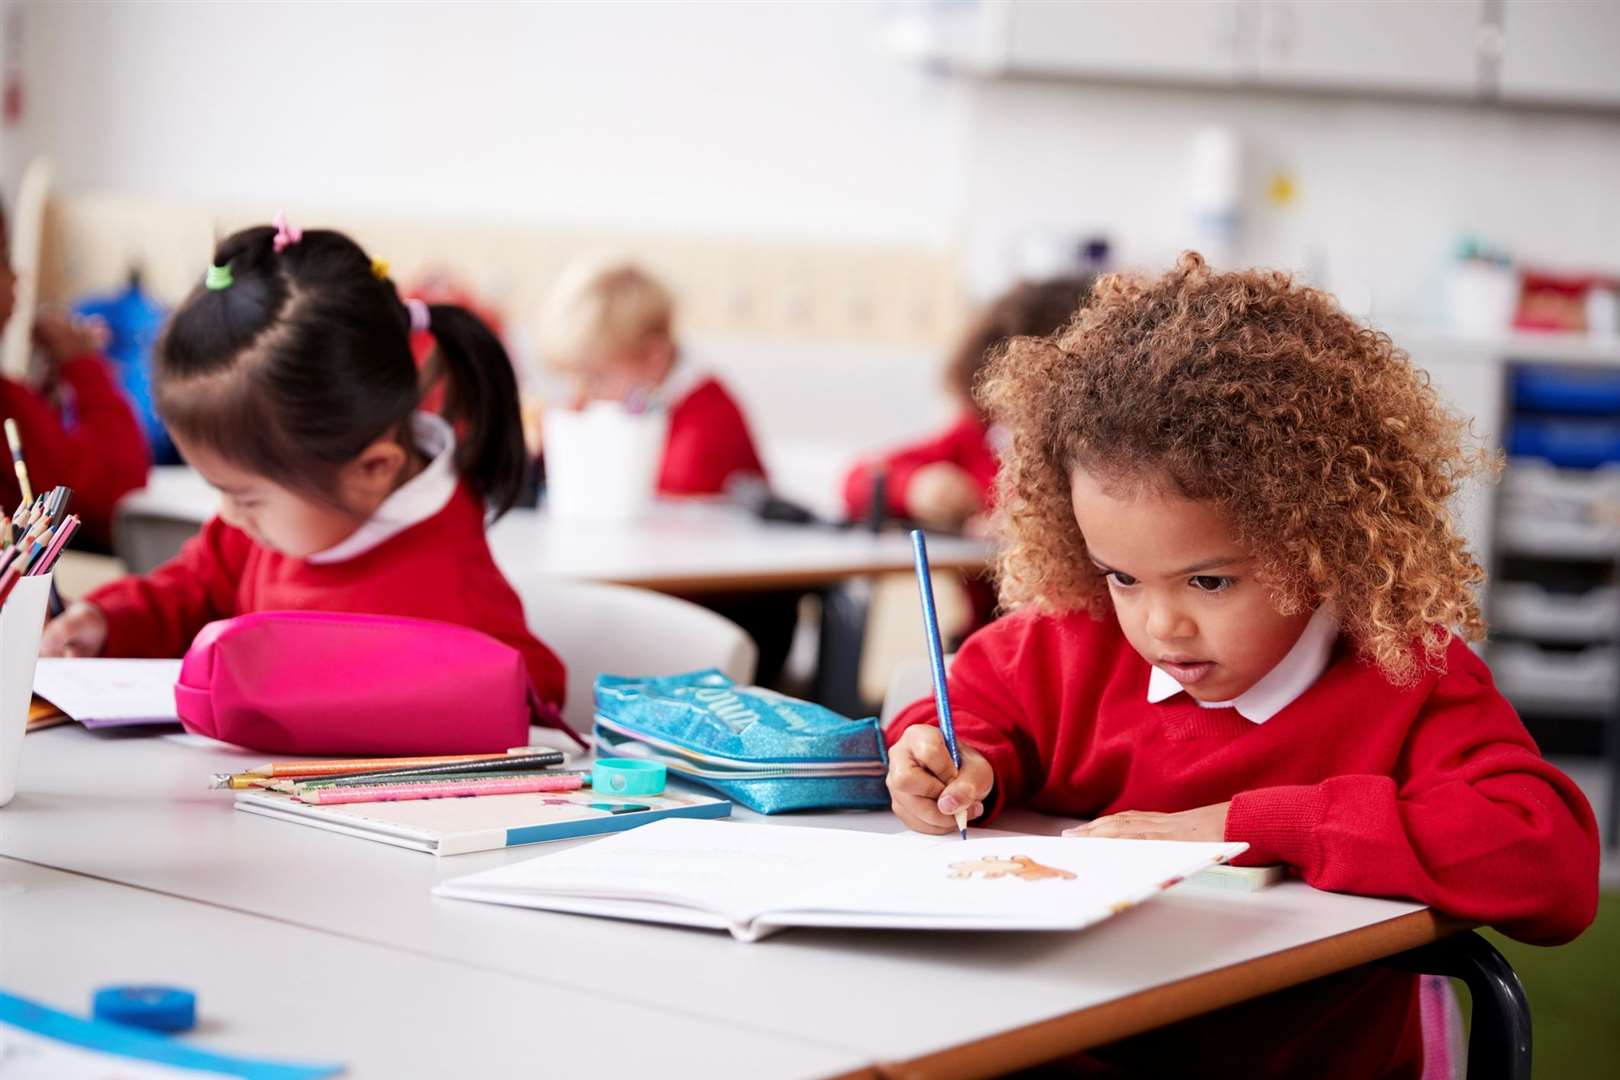 Parents need permission - in advance - to take their children out of school. Image: iStock.